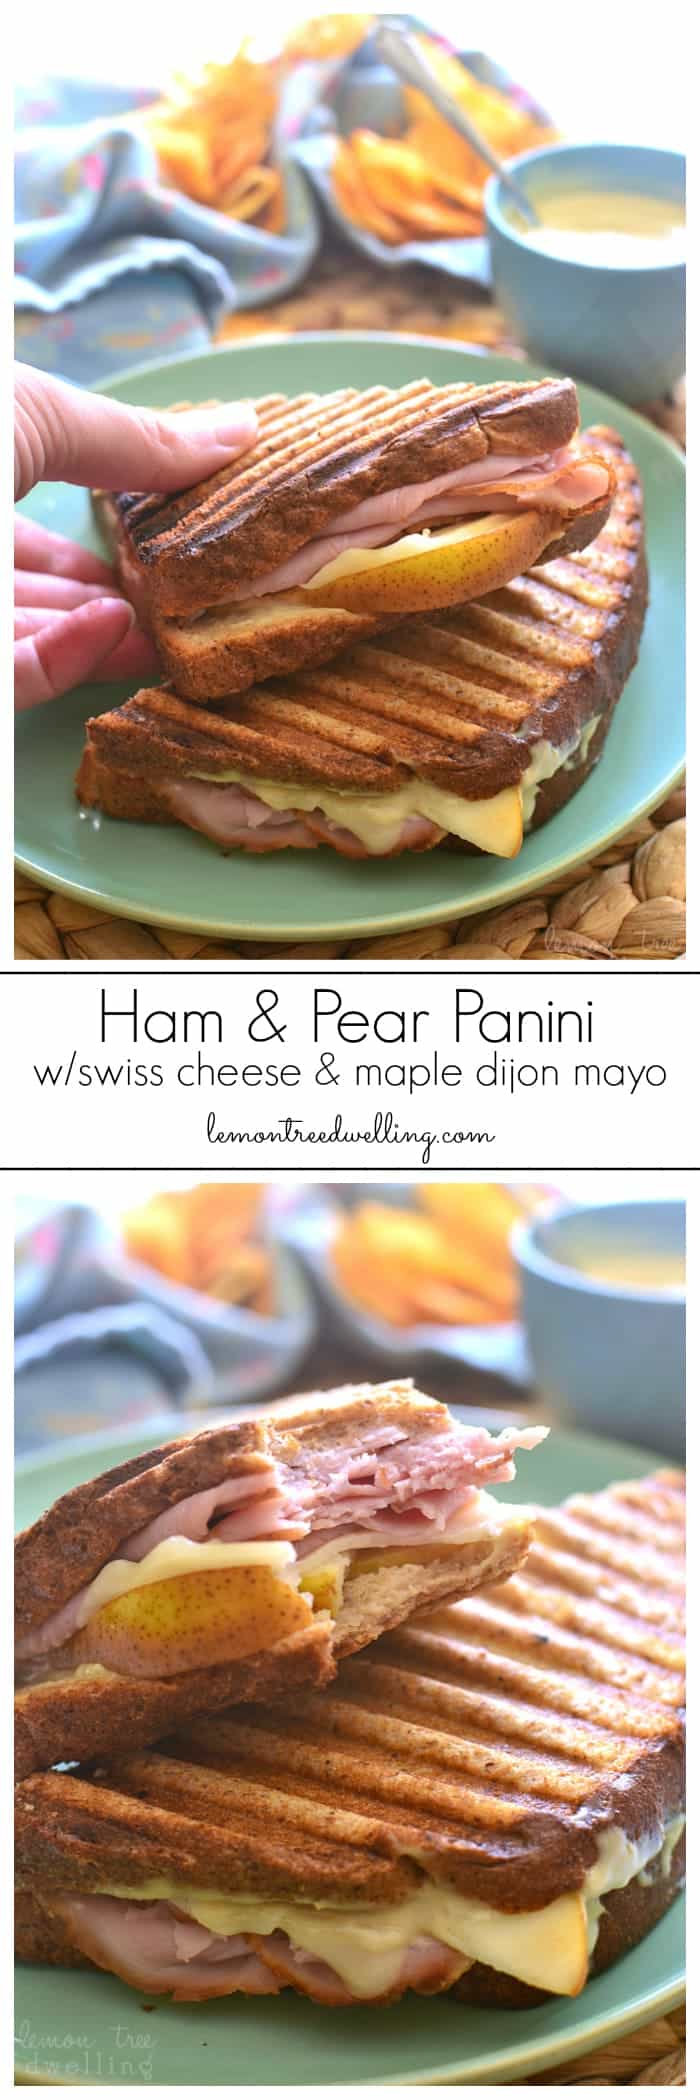 This Ham & Pear Panini is packed with ham, swiss, and fresh pears, then slathered in a delicious maple dijon mayo and grilled to perfection!